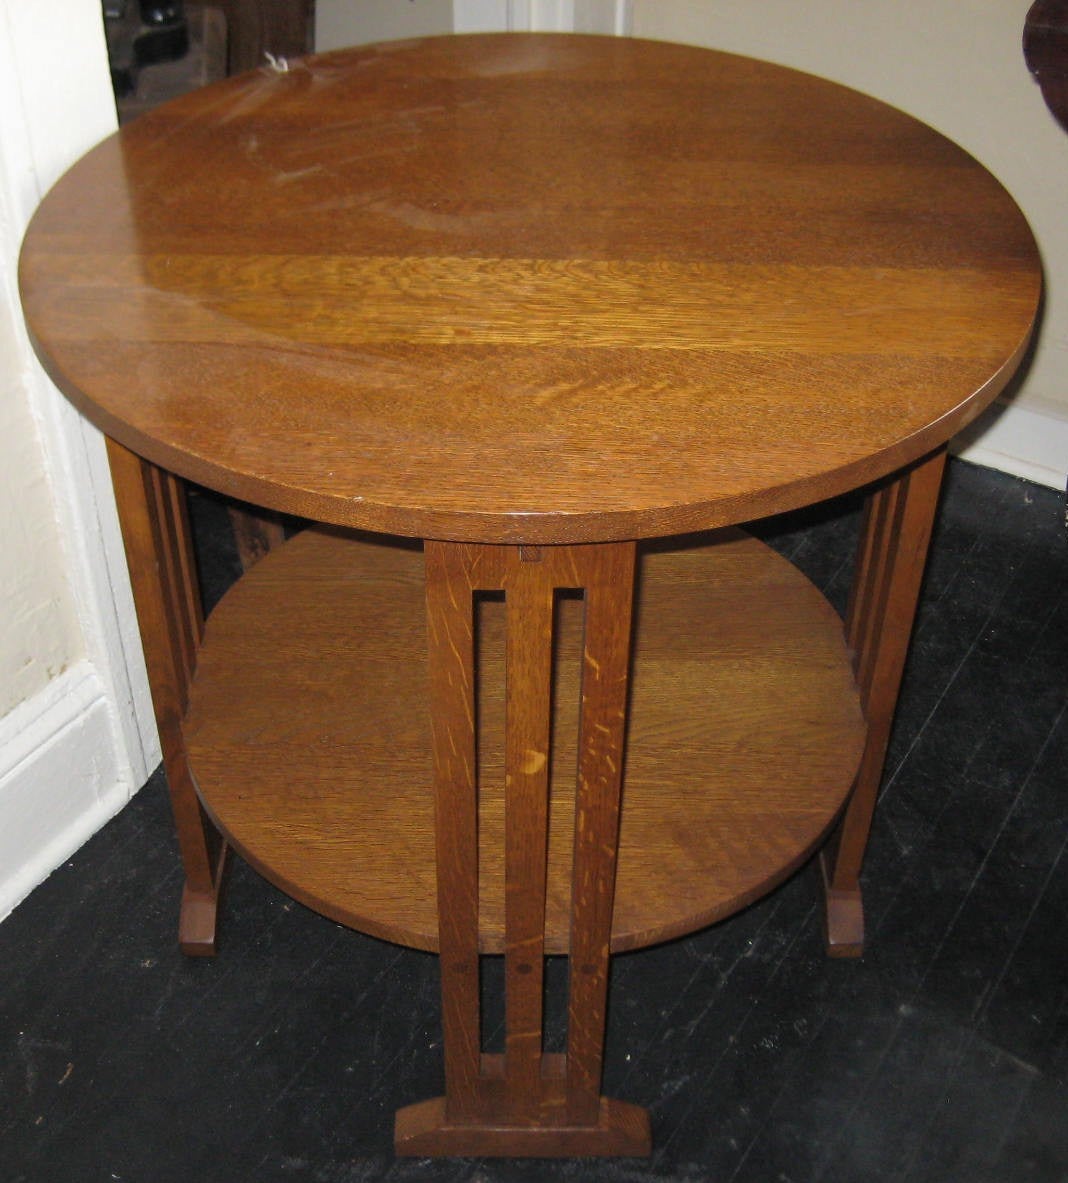 Stickley style Oak Lamp Table with Shelf